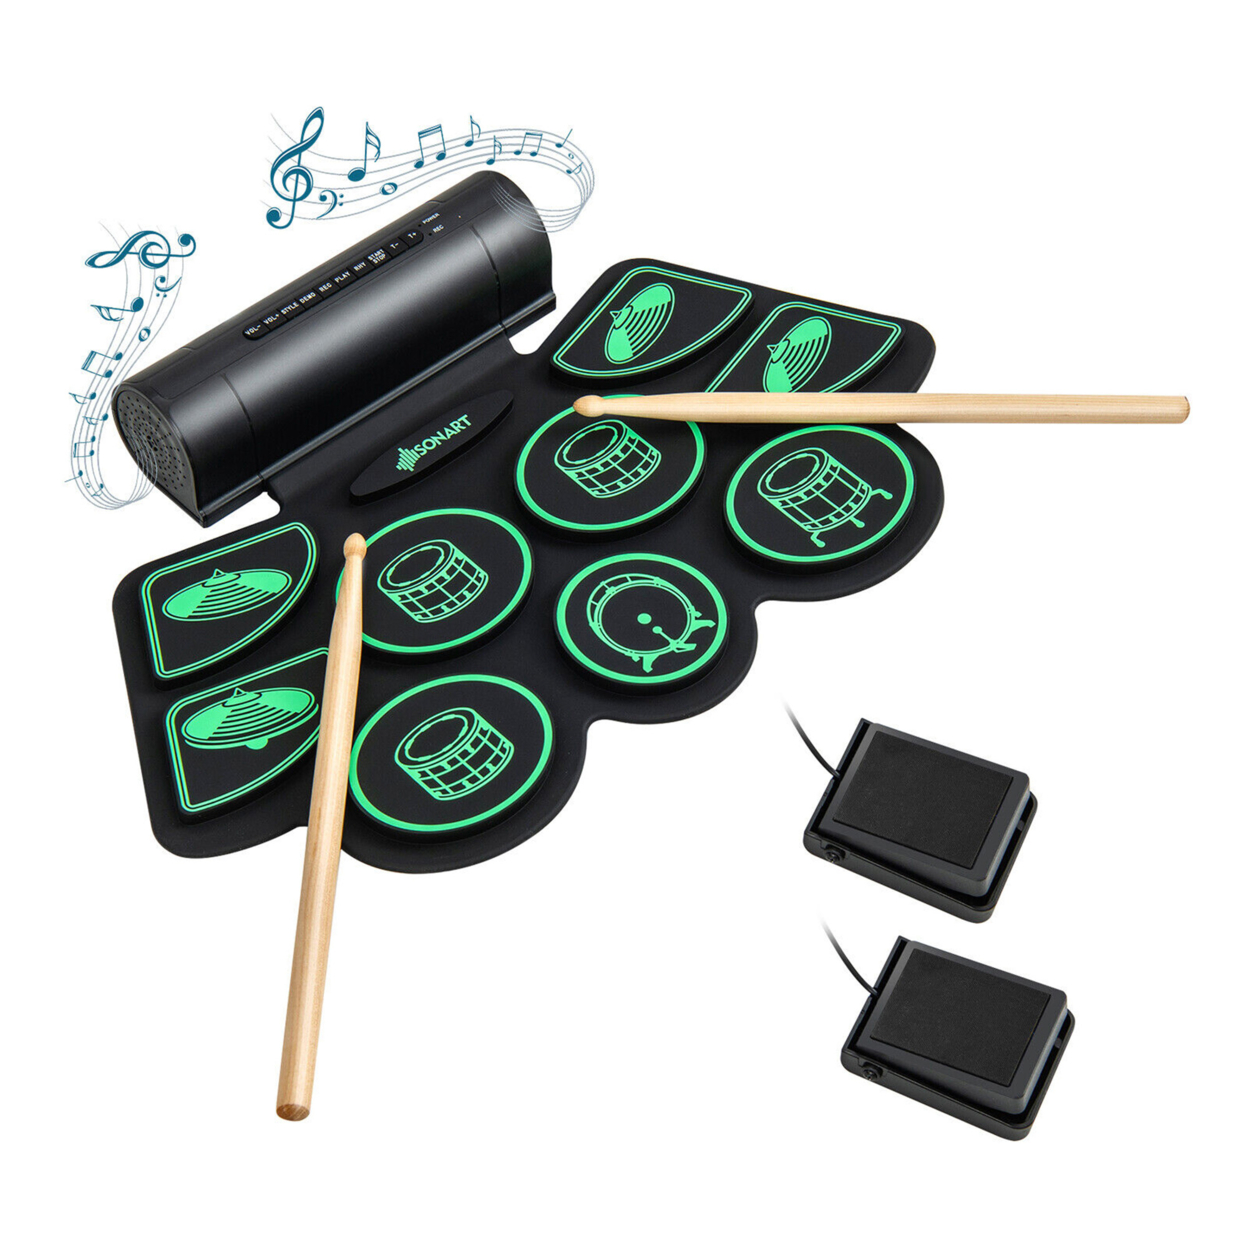 9 Pads Electronic Drum Set Roll Up Drum Kit W/ MIDI & Dual Stereo Speakers - Green+Black